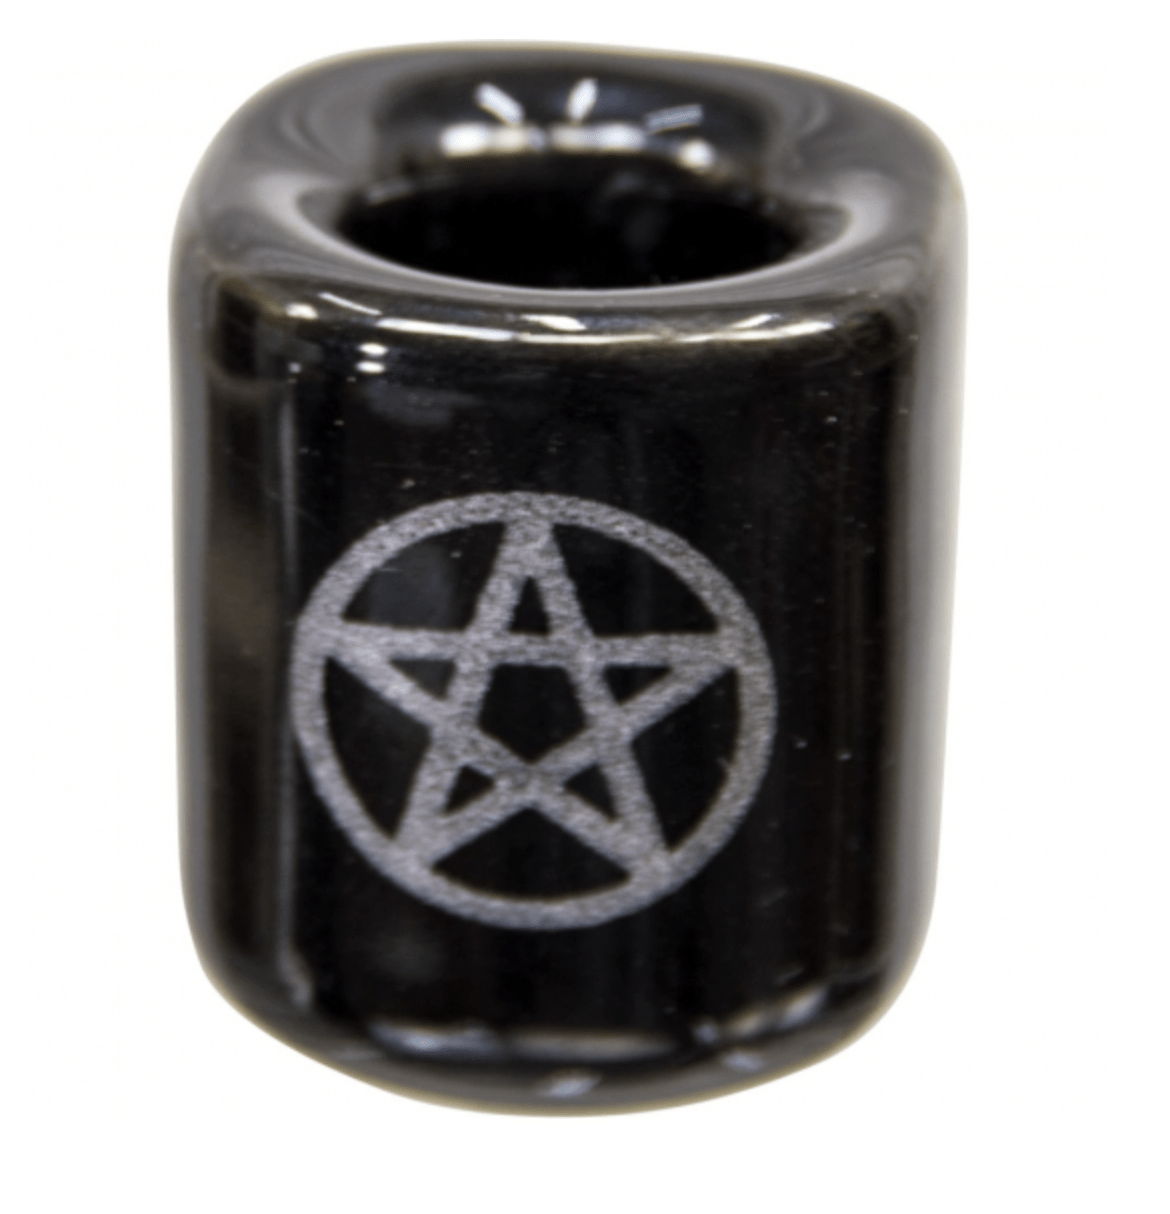 Ceramic Chime Candle Holder - Black w/ Silver Pentacle - Spiral Circle